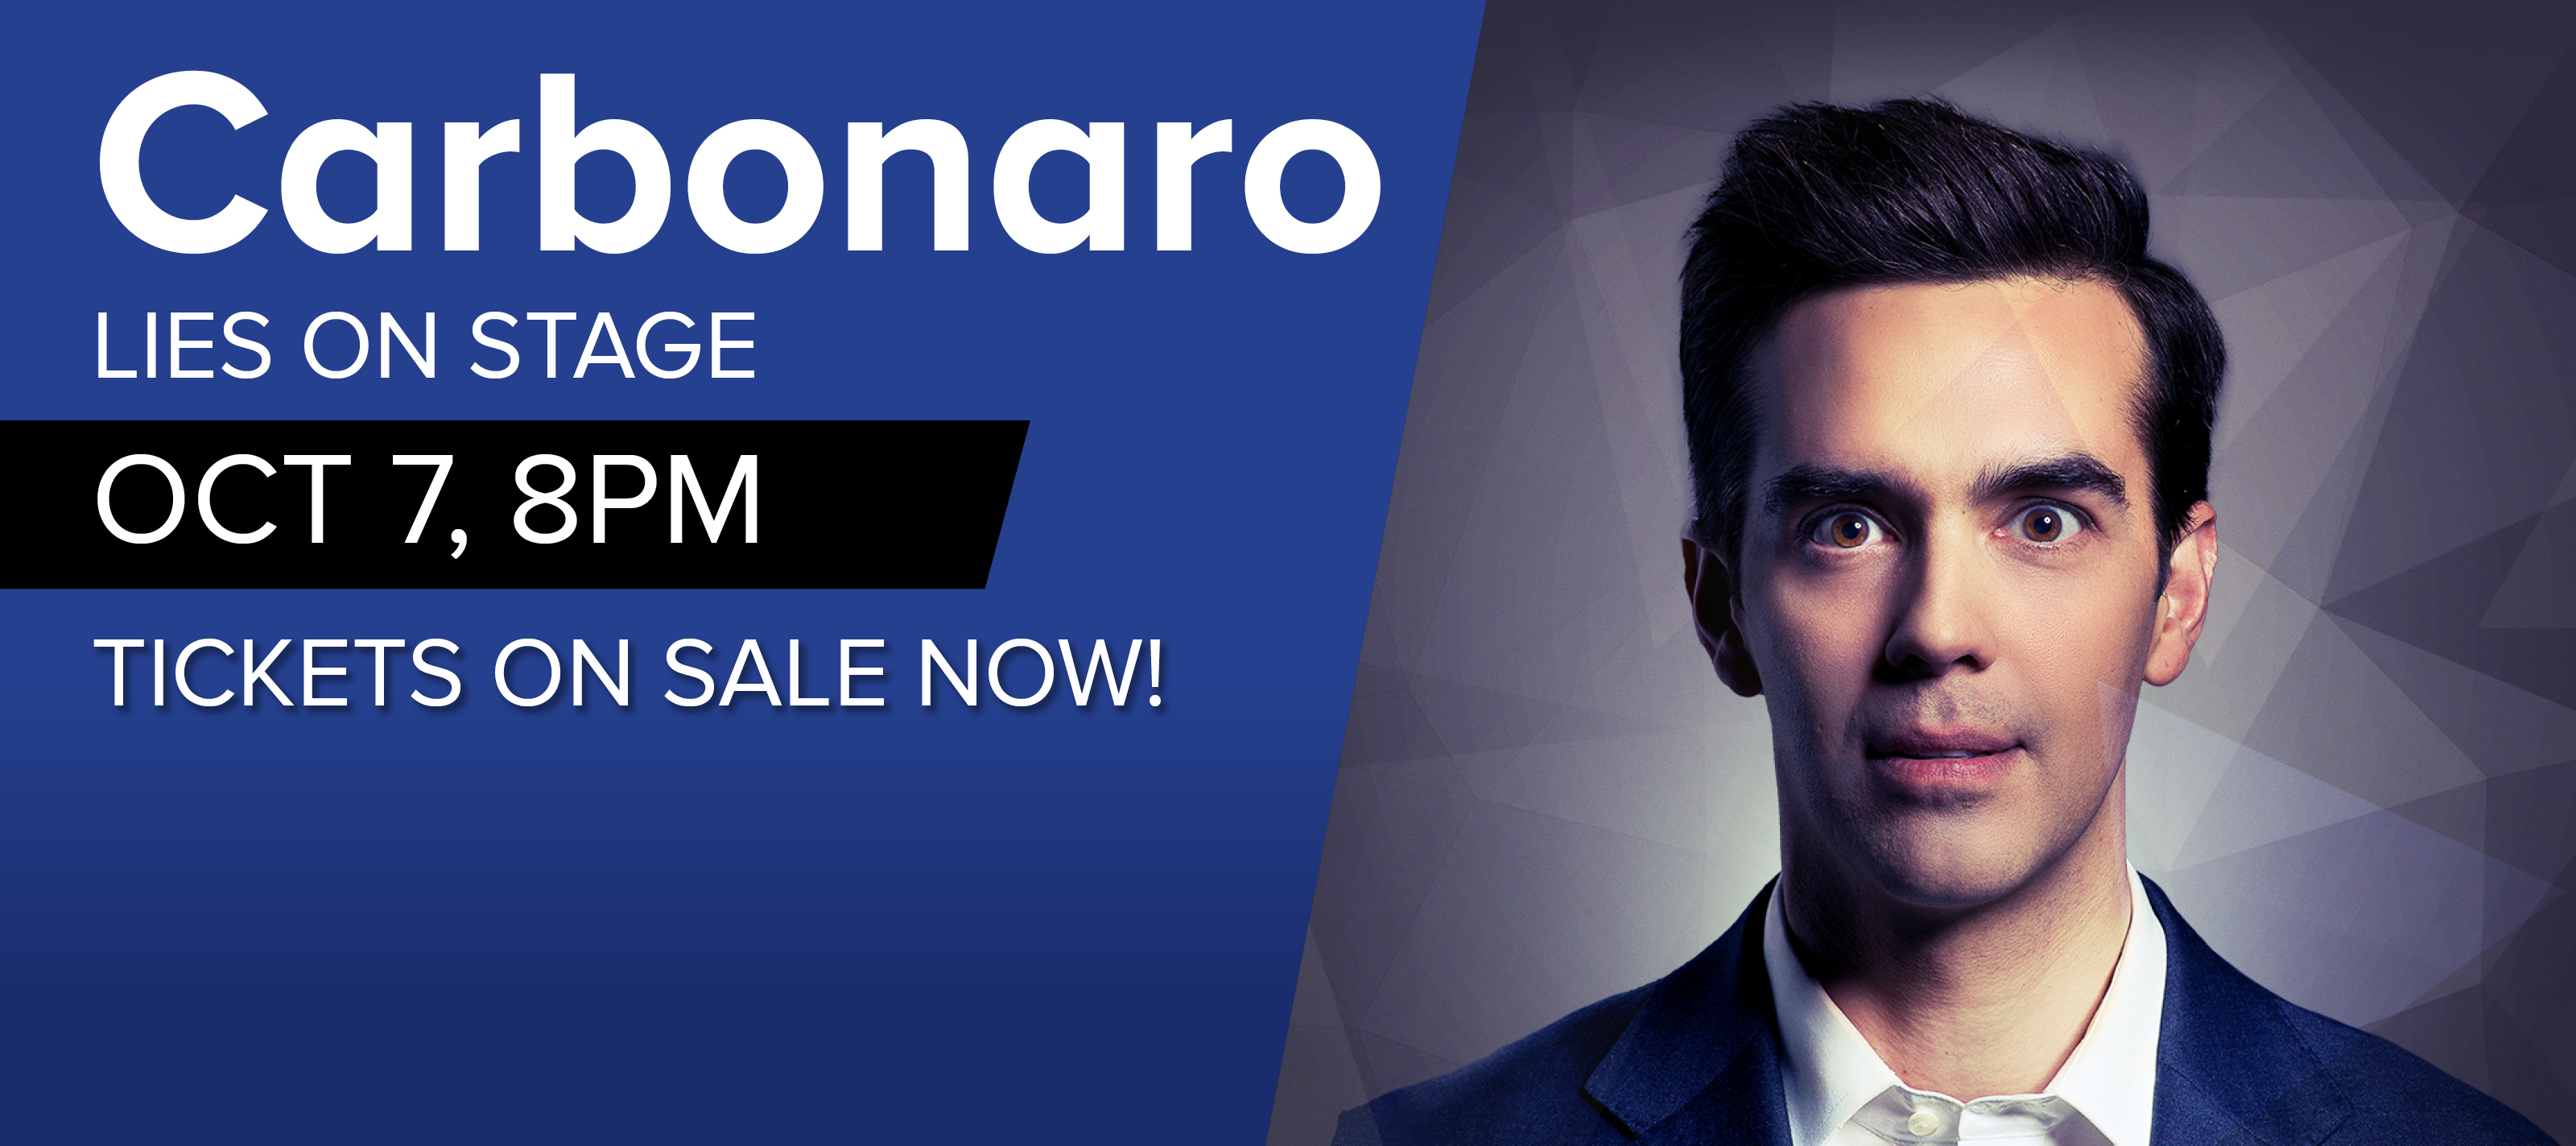 Carbonaro Lies on Stage Oct 7 8pm Tickets on sale now